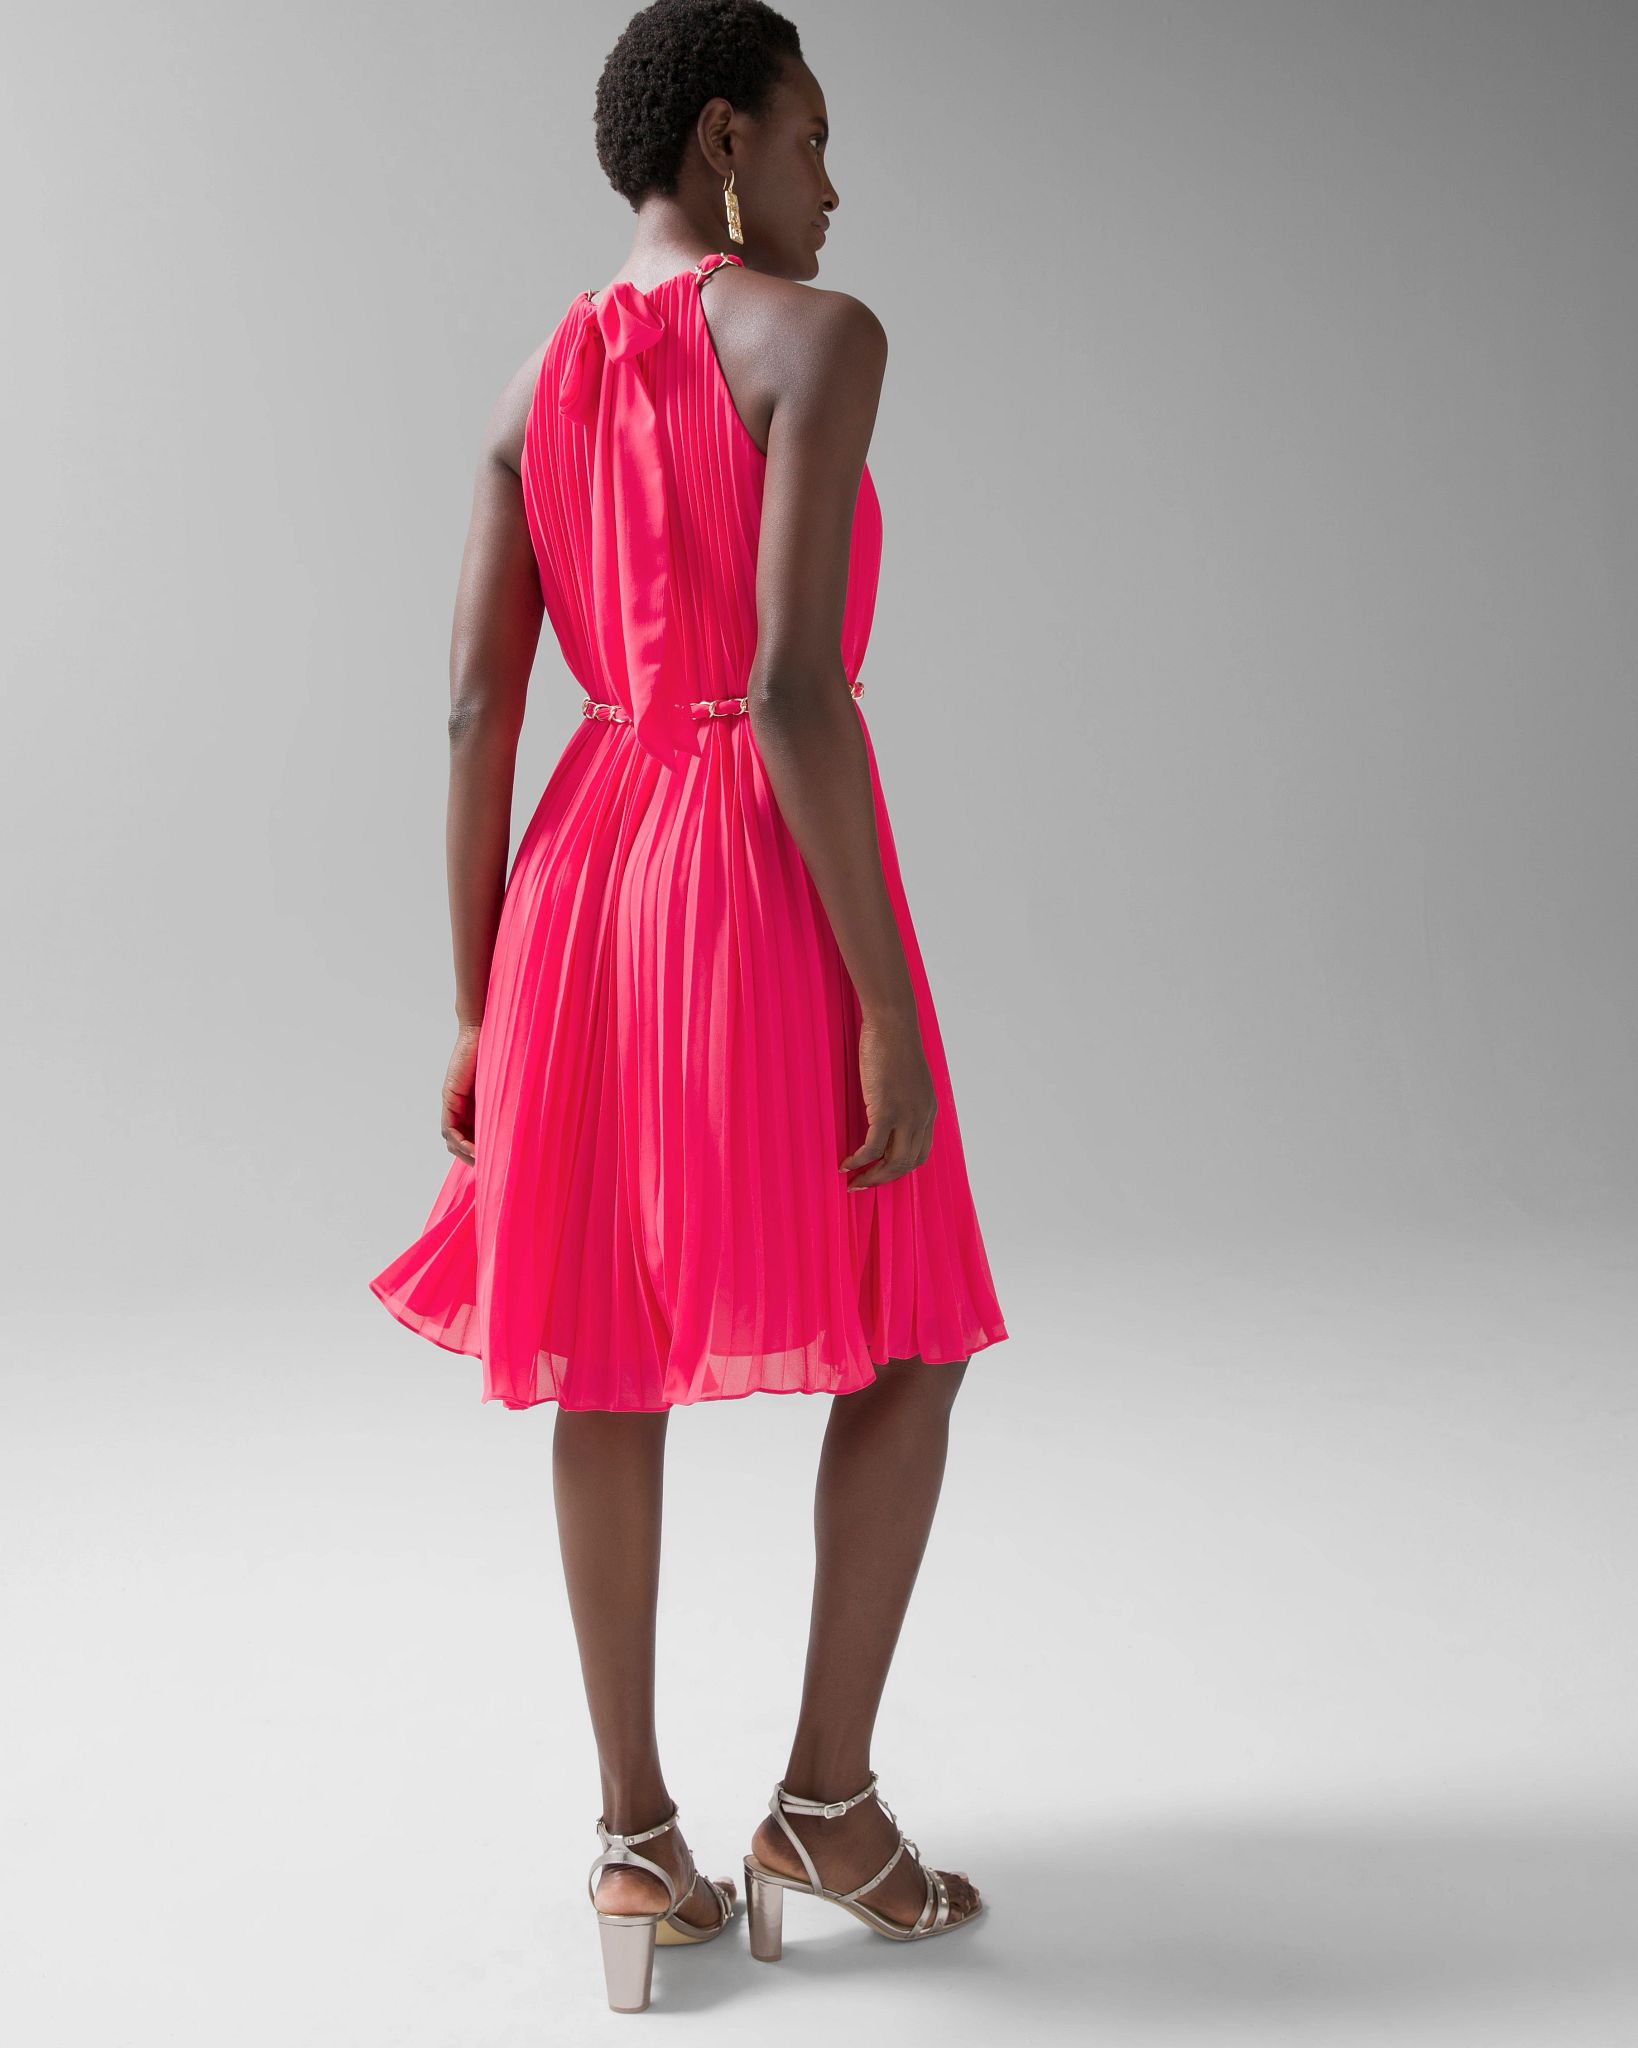 Sleeveless Pleated Halter Dress with Chain Detail click to view larger image.